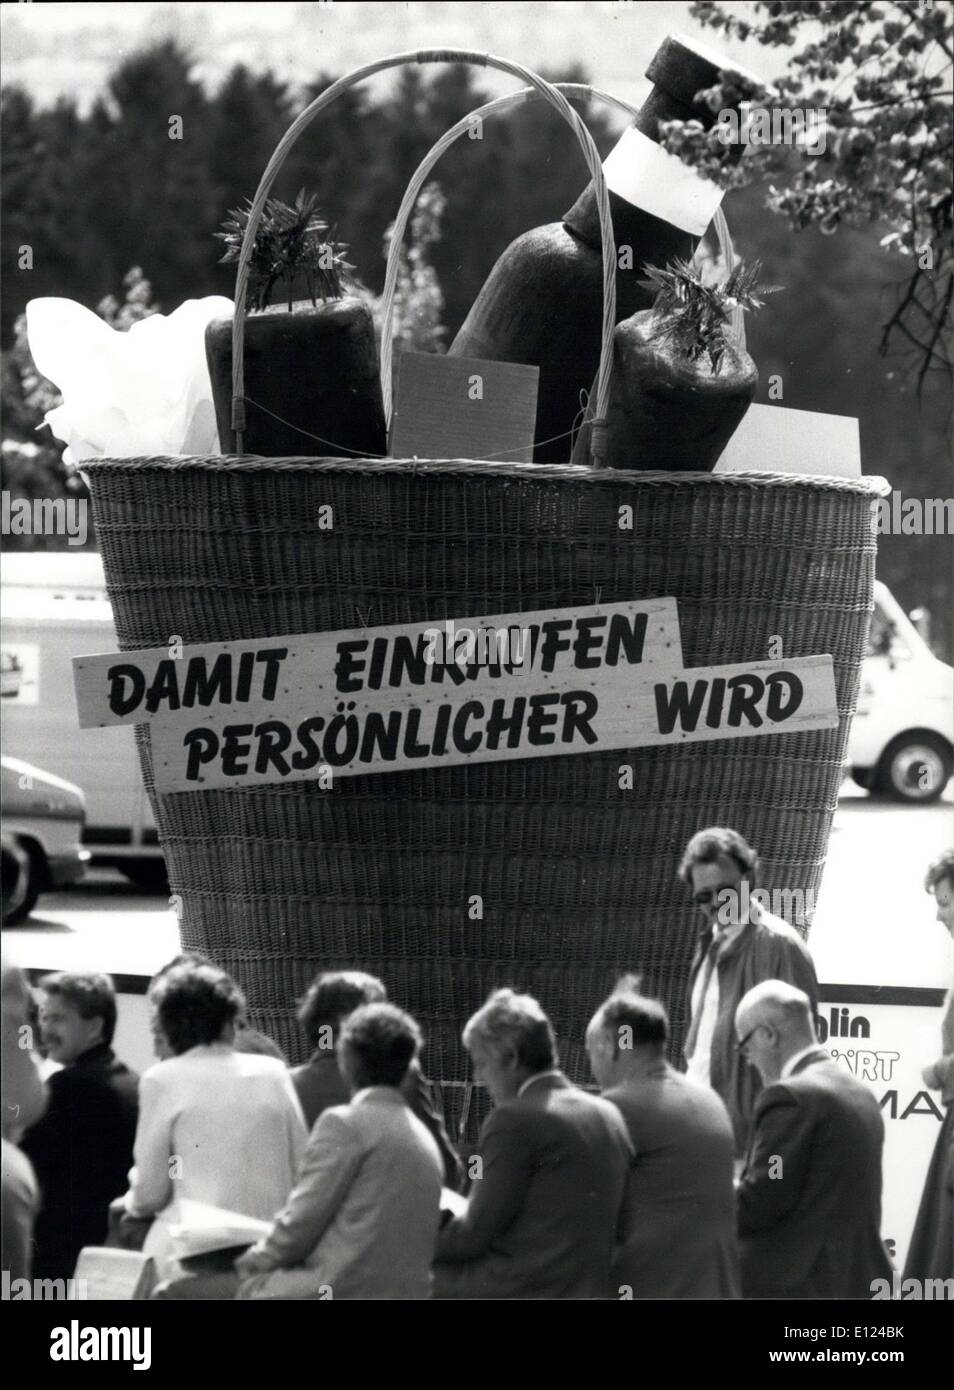 Oct. 09, 1985 - Largest Shopping Basket: The world larges shopping basket was shown these days in Sempach/Switzerland where a foodstore-groop made public relation action. The basket was made by blinds a has an altitude of 4 years. Stock Photo